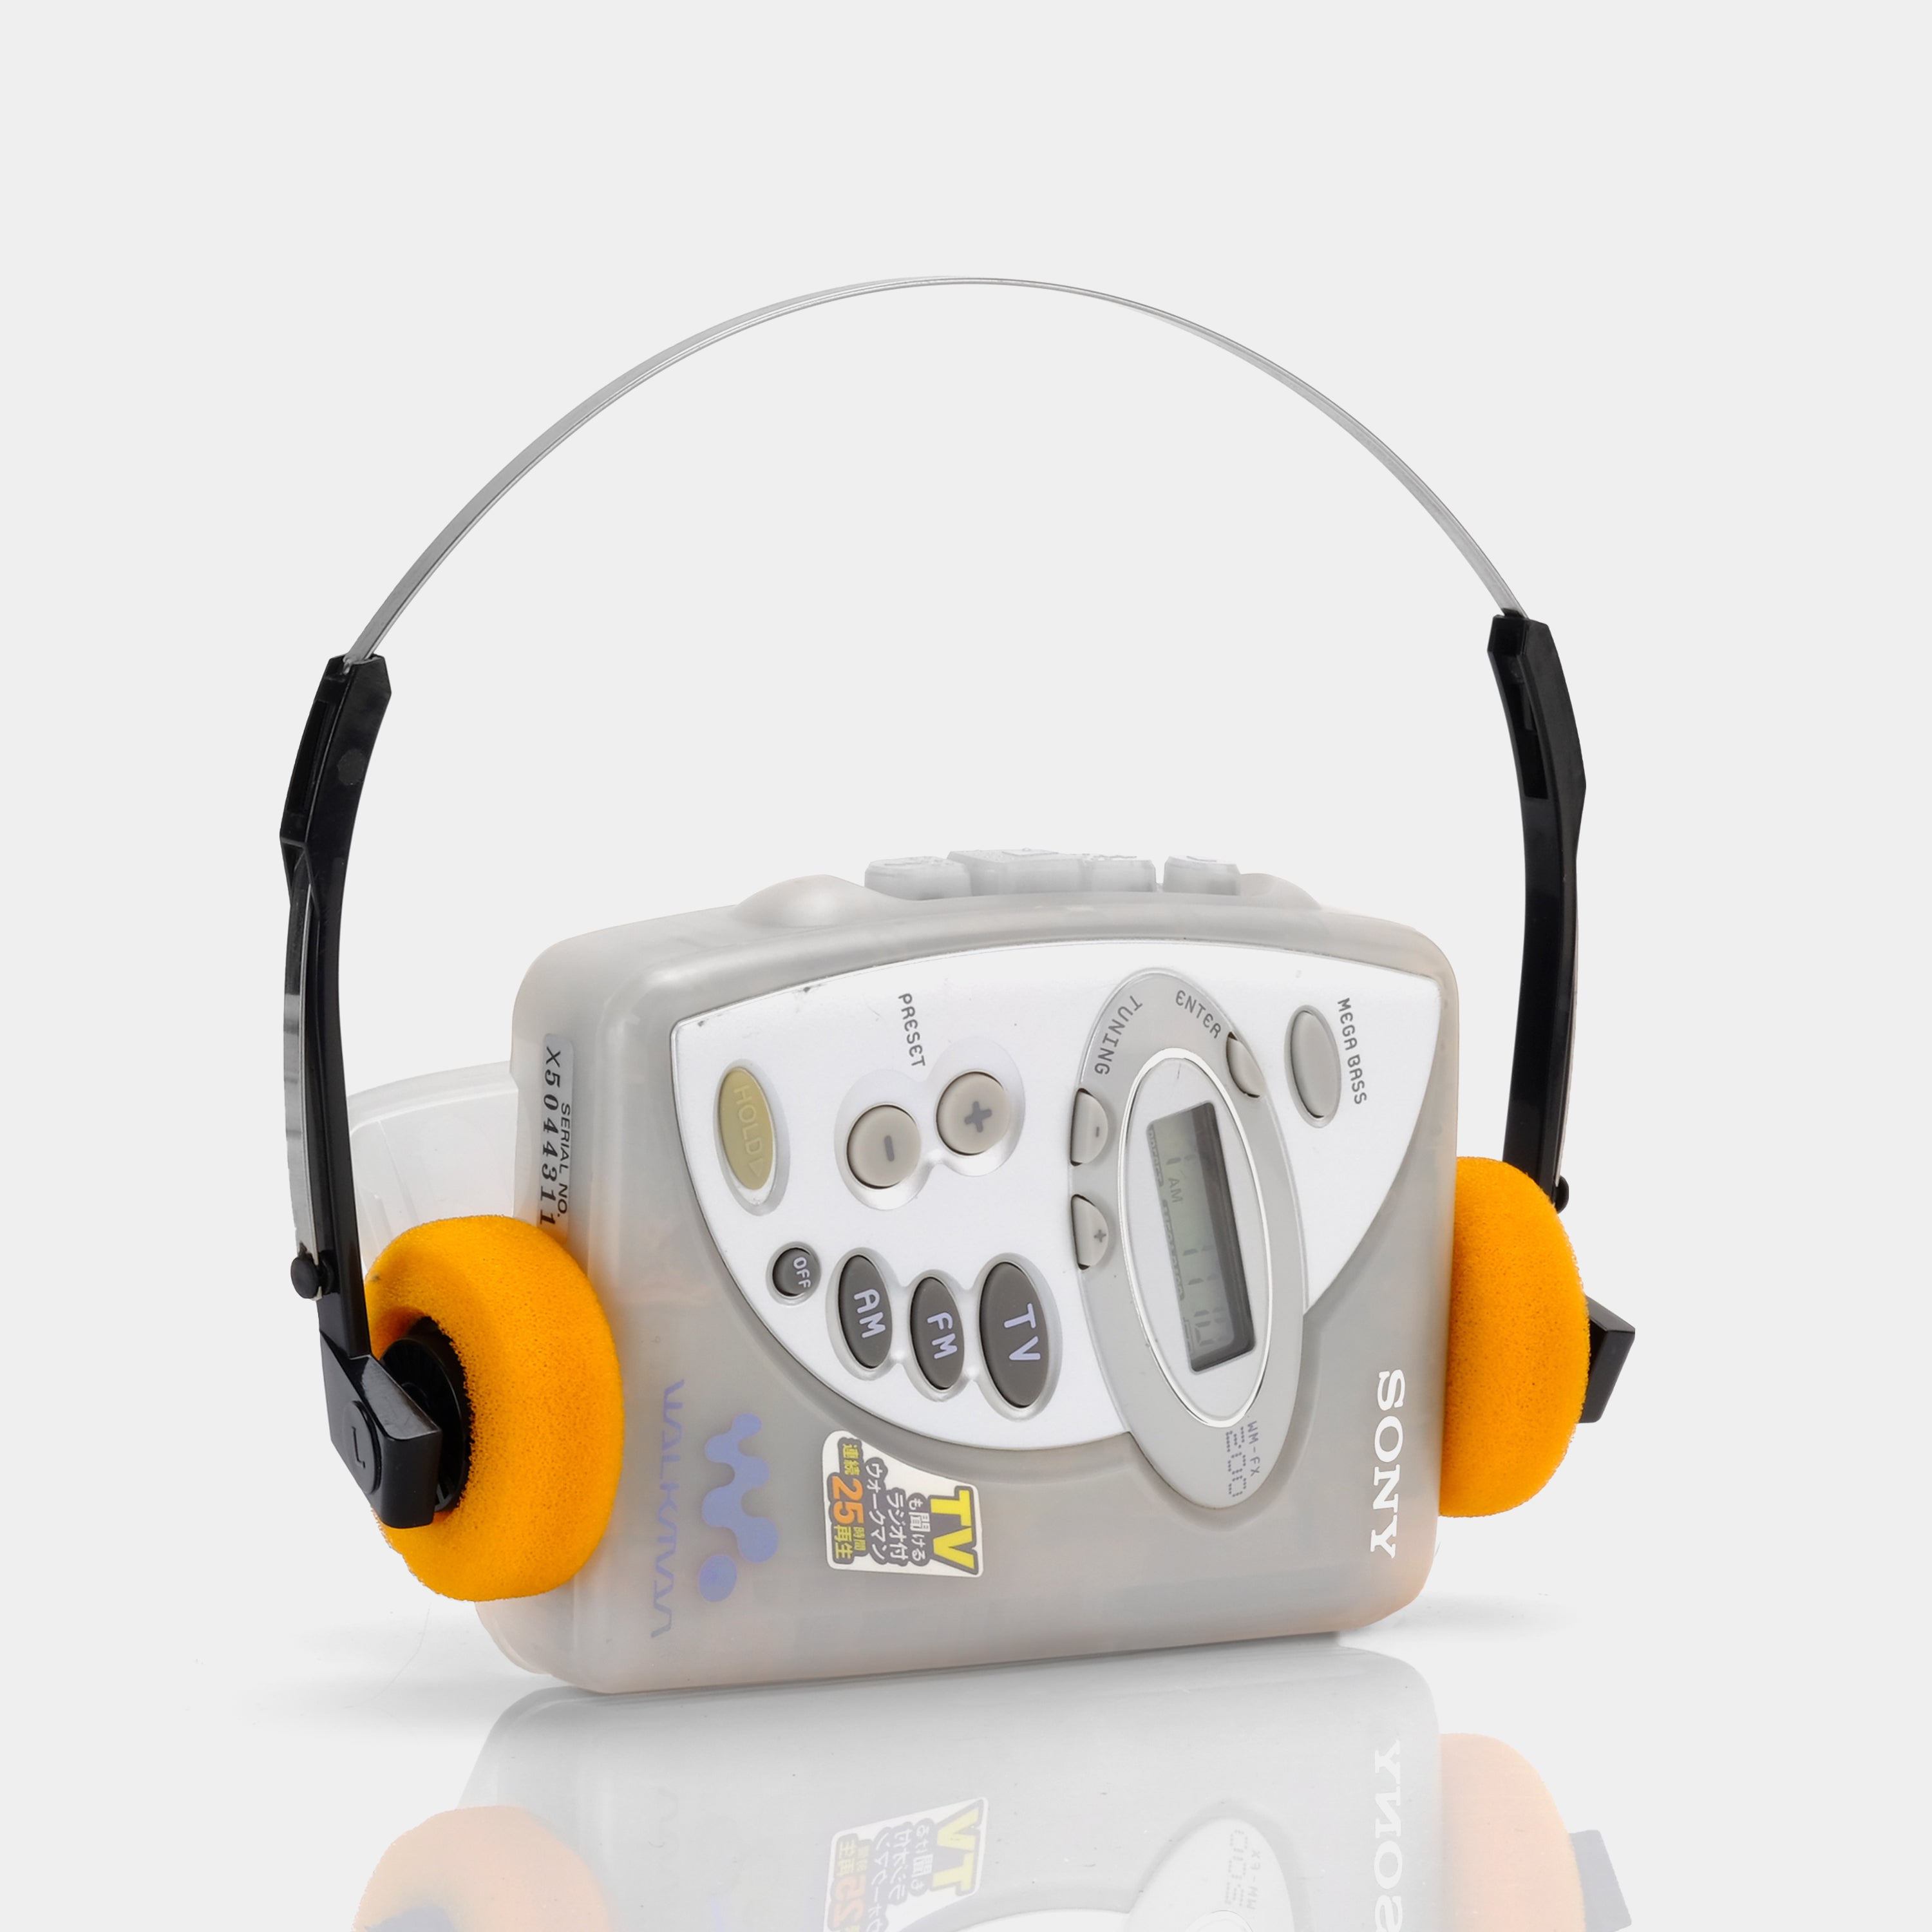 Sony Walkman WM-FX200 AM/FM Frosted Clear Portable Cassette Player